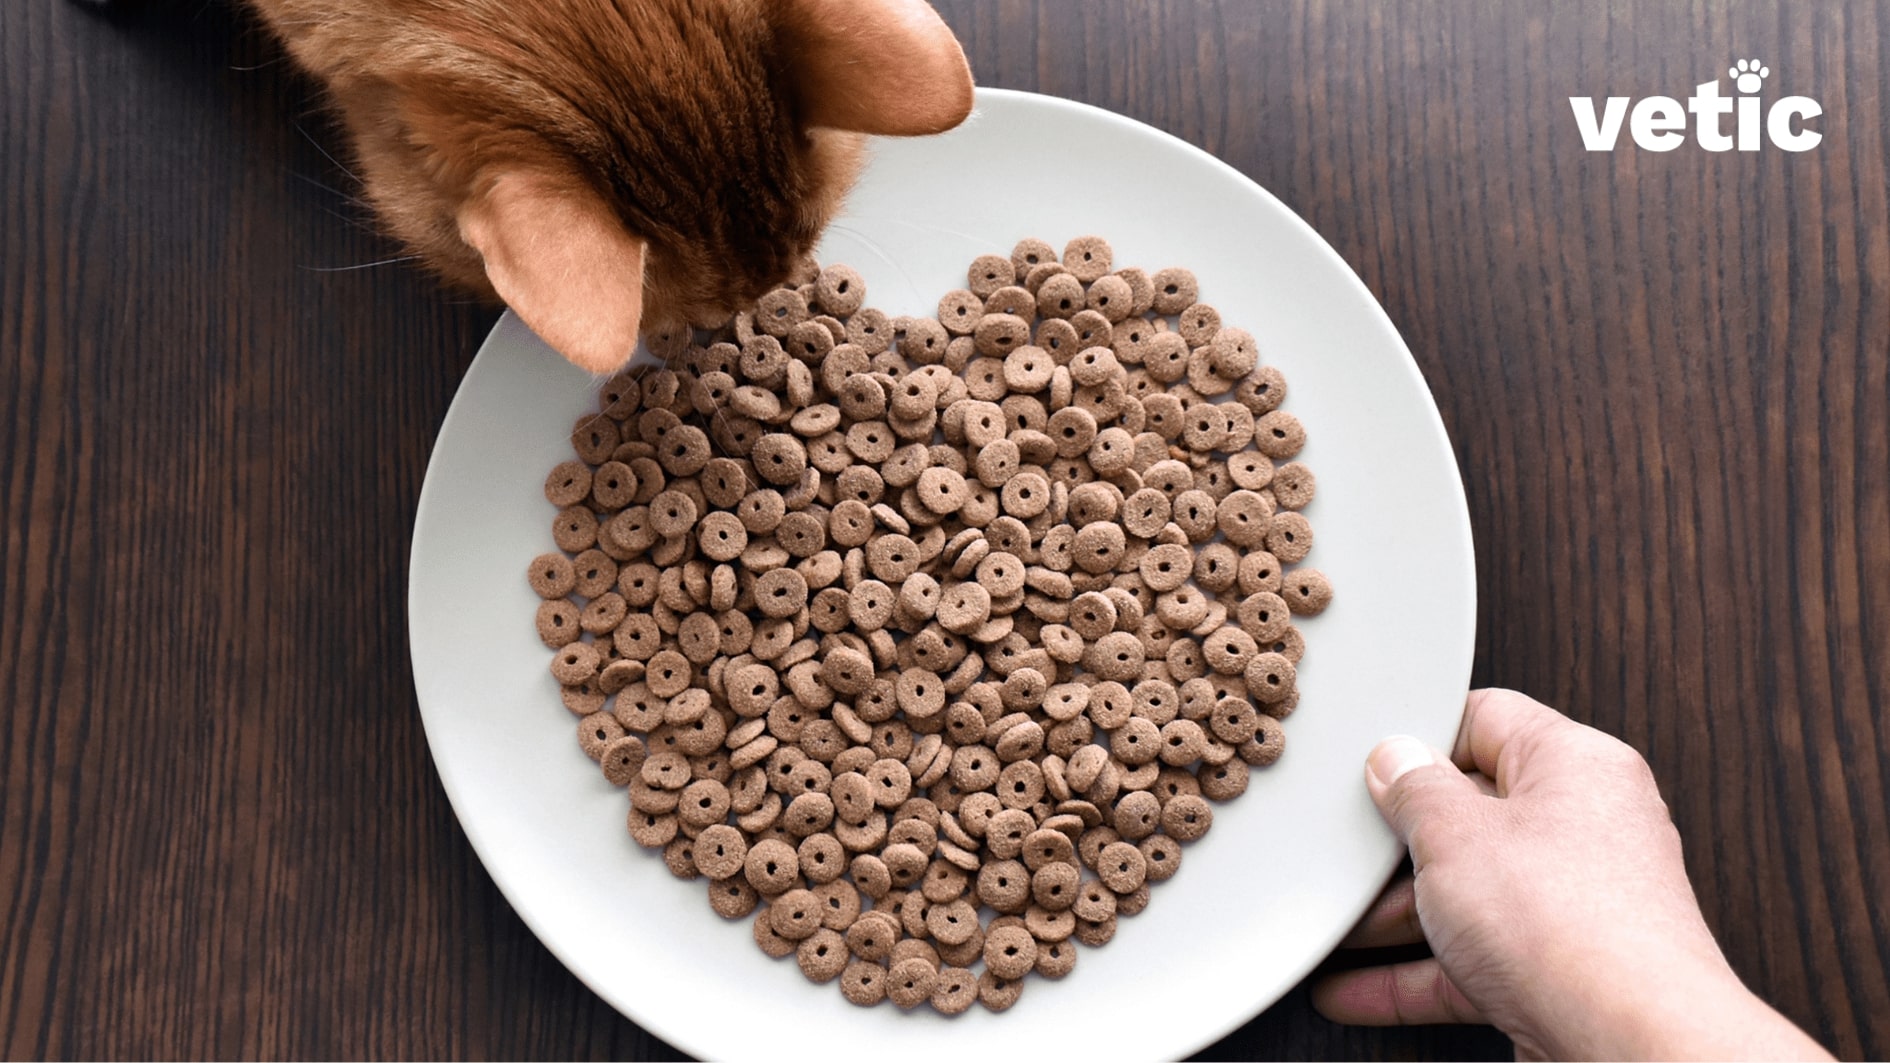 A hand presenting a cat with a plate of round kitty kibbles arranged in the shape of a heart. only the top of the cat's head is in frame, directly opposite to where the hand is holding the plate. If you are vegan or vegetarian invest in good quality cat food since it's impossible for cats to be vegetarian or vegan